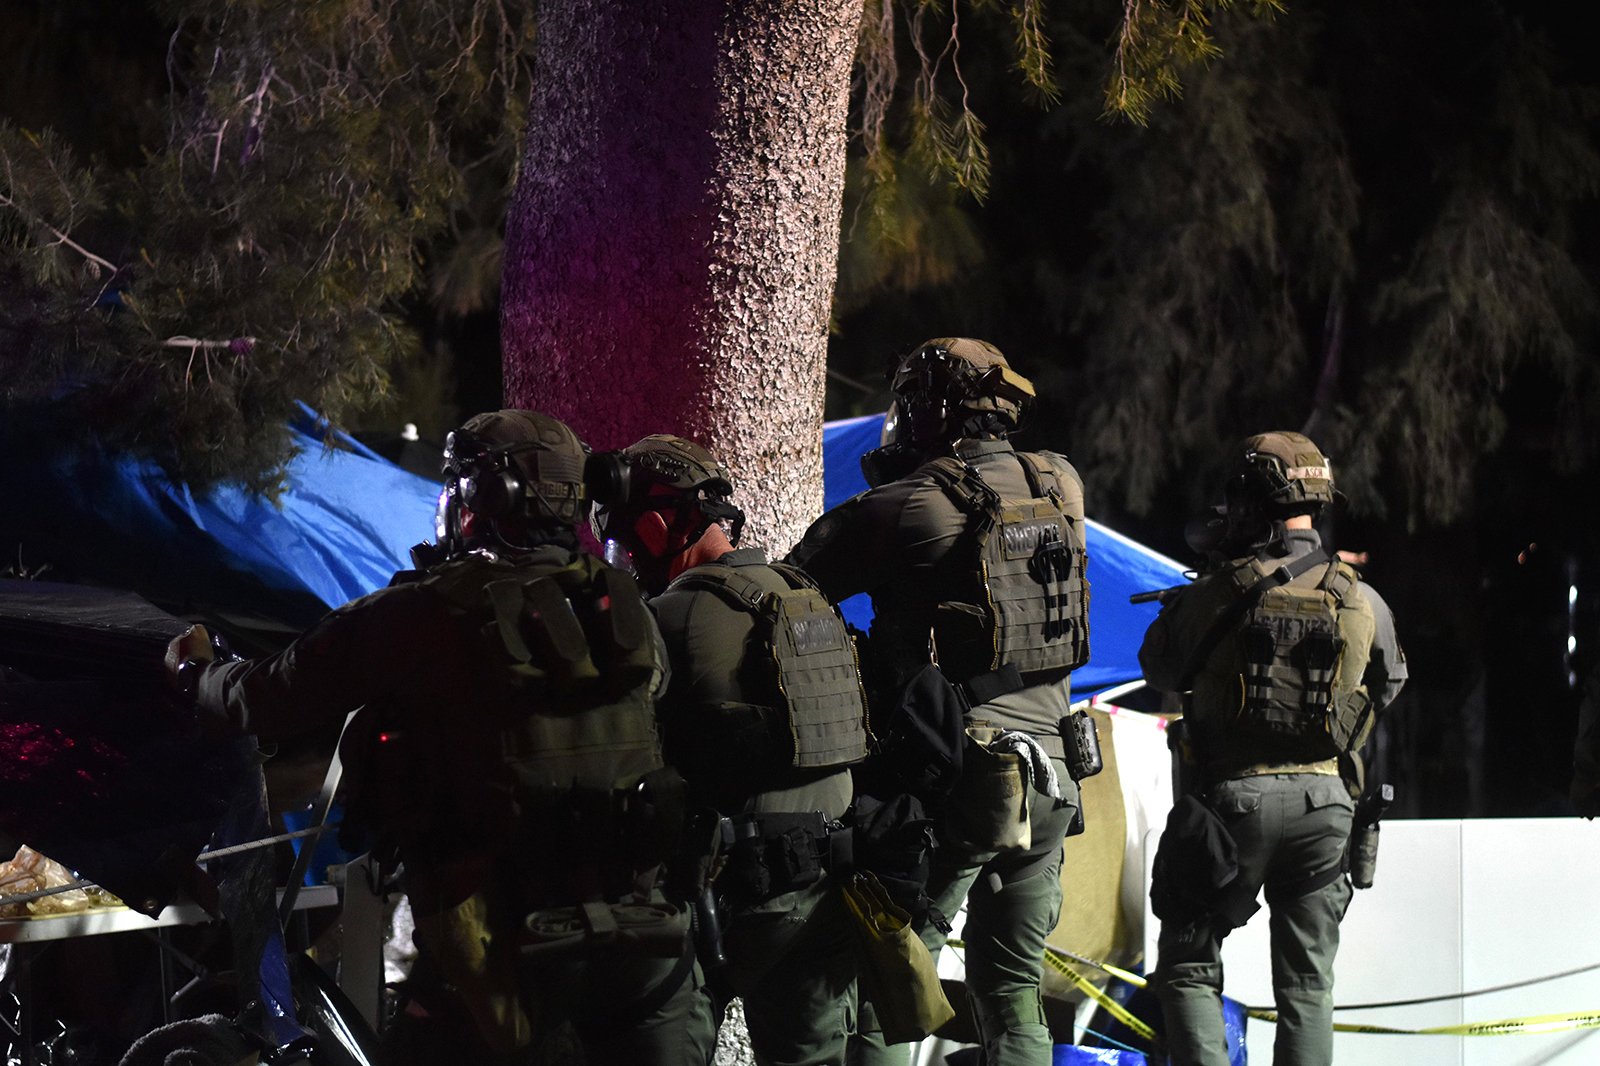 Law enforcement tear down an encampment that protesters had built on the University of Arizona campus on May 1.